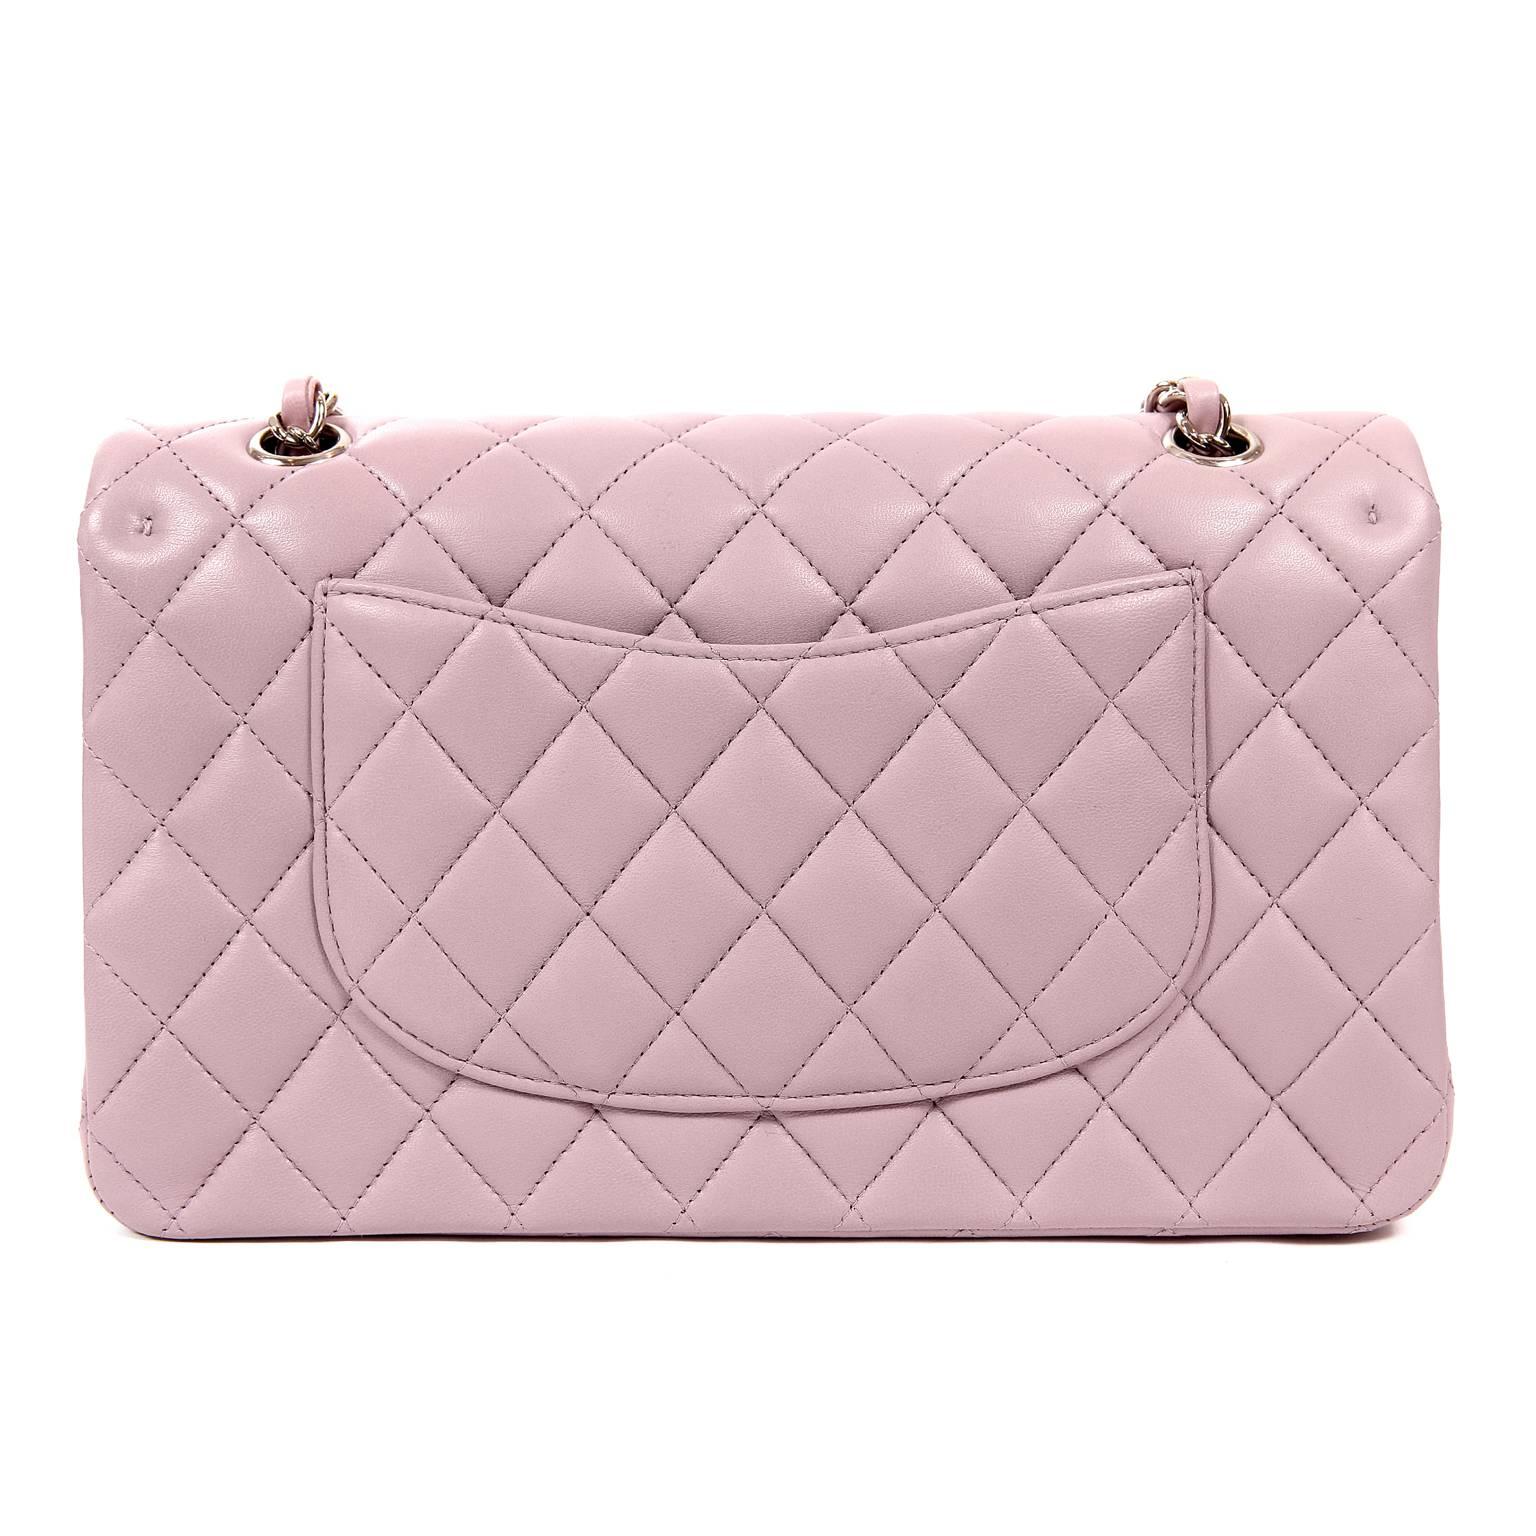 This authentic Chanel Lilac Lambskin Medium Classic Flap is pristine- never before carried.   The timeless style is strikingly lovely in soft lilac with silver hardware.  
Feminine soft lilac lambskin is quilted in signature Chanel diamond pattern. 